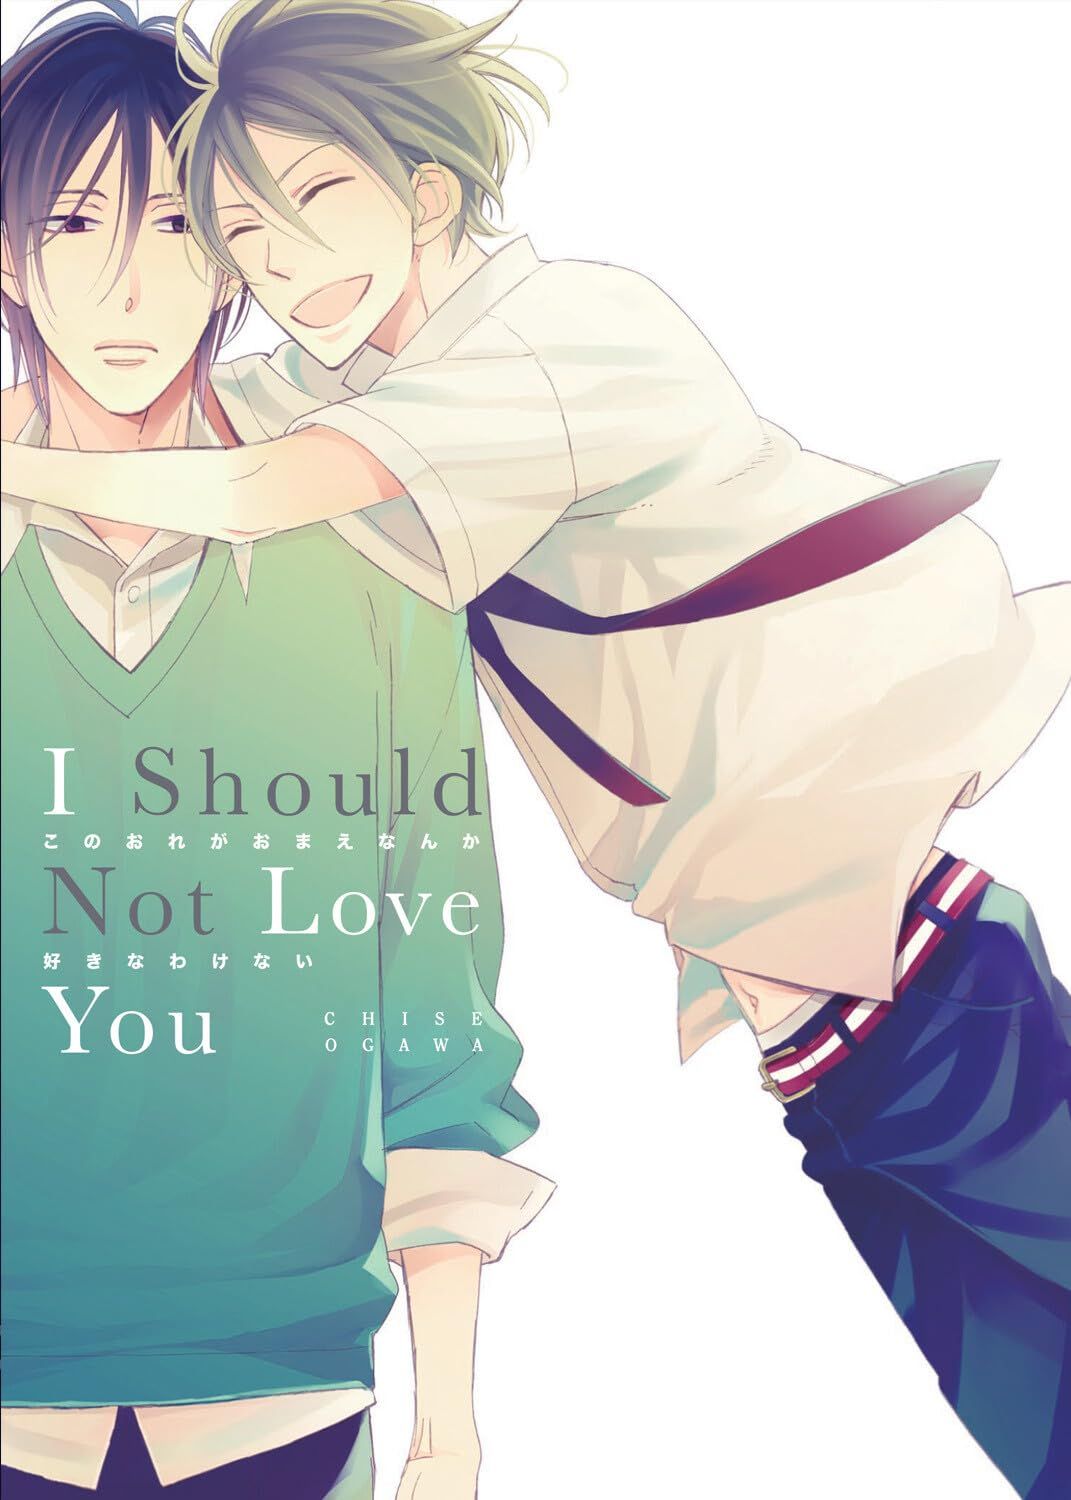 I Should Not Love You by Chise Ogawa cover